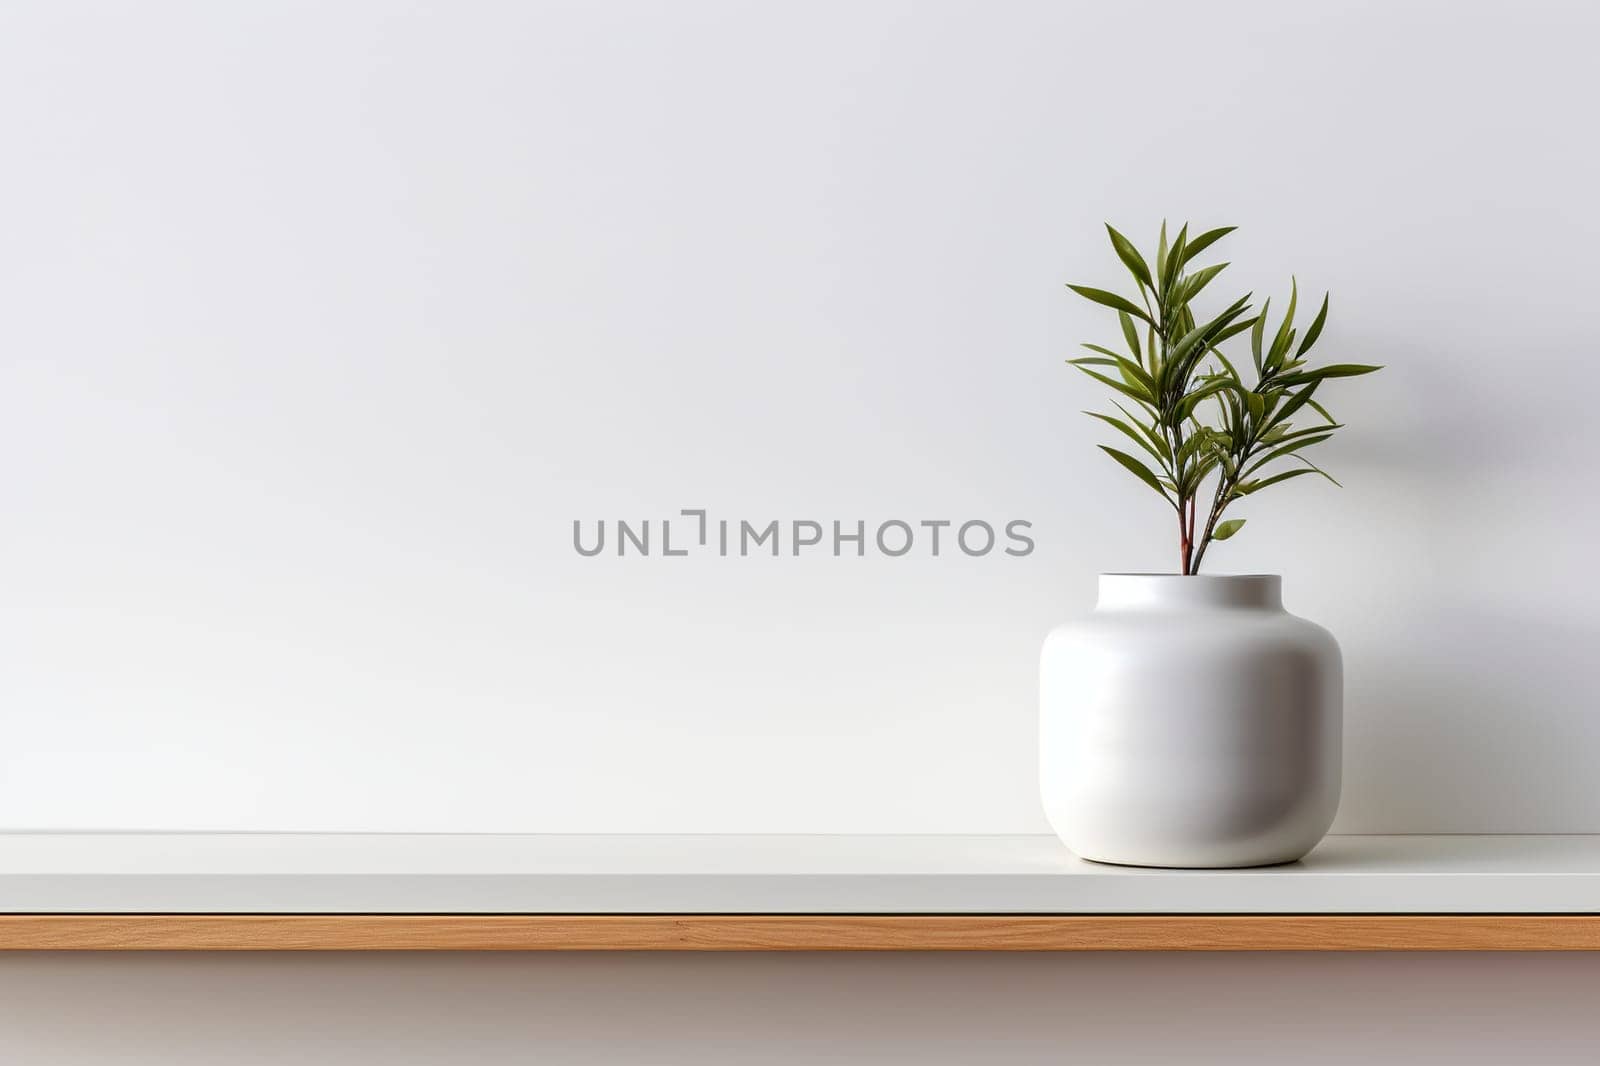 Wooden shelf with a green plant in a white pot against a white wall. Generated by artificial intelligence by Vovmar